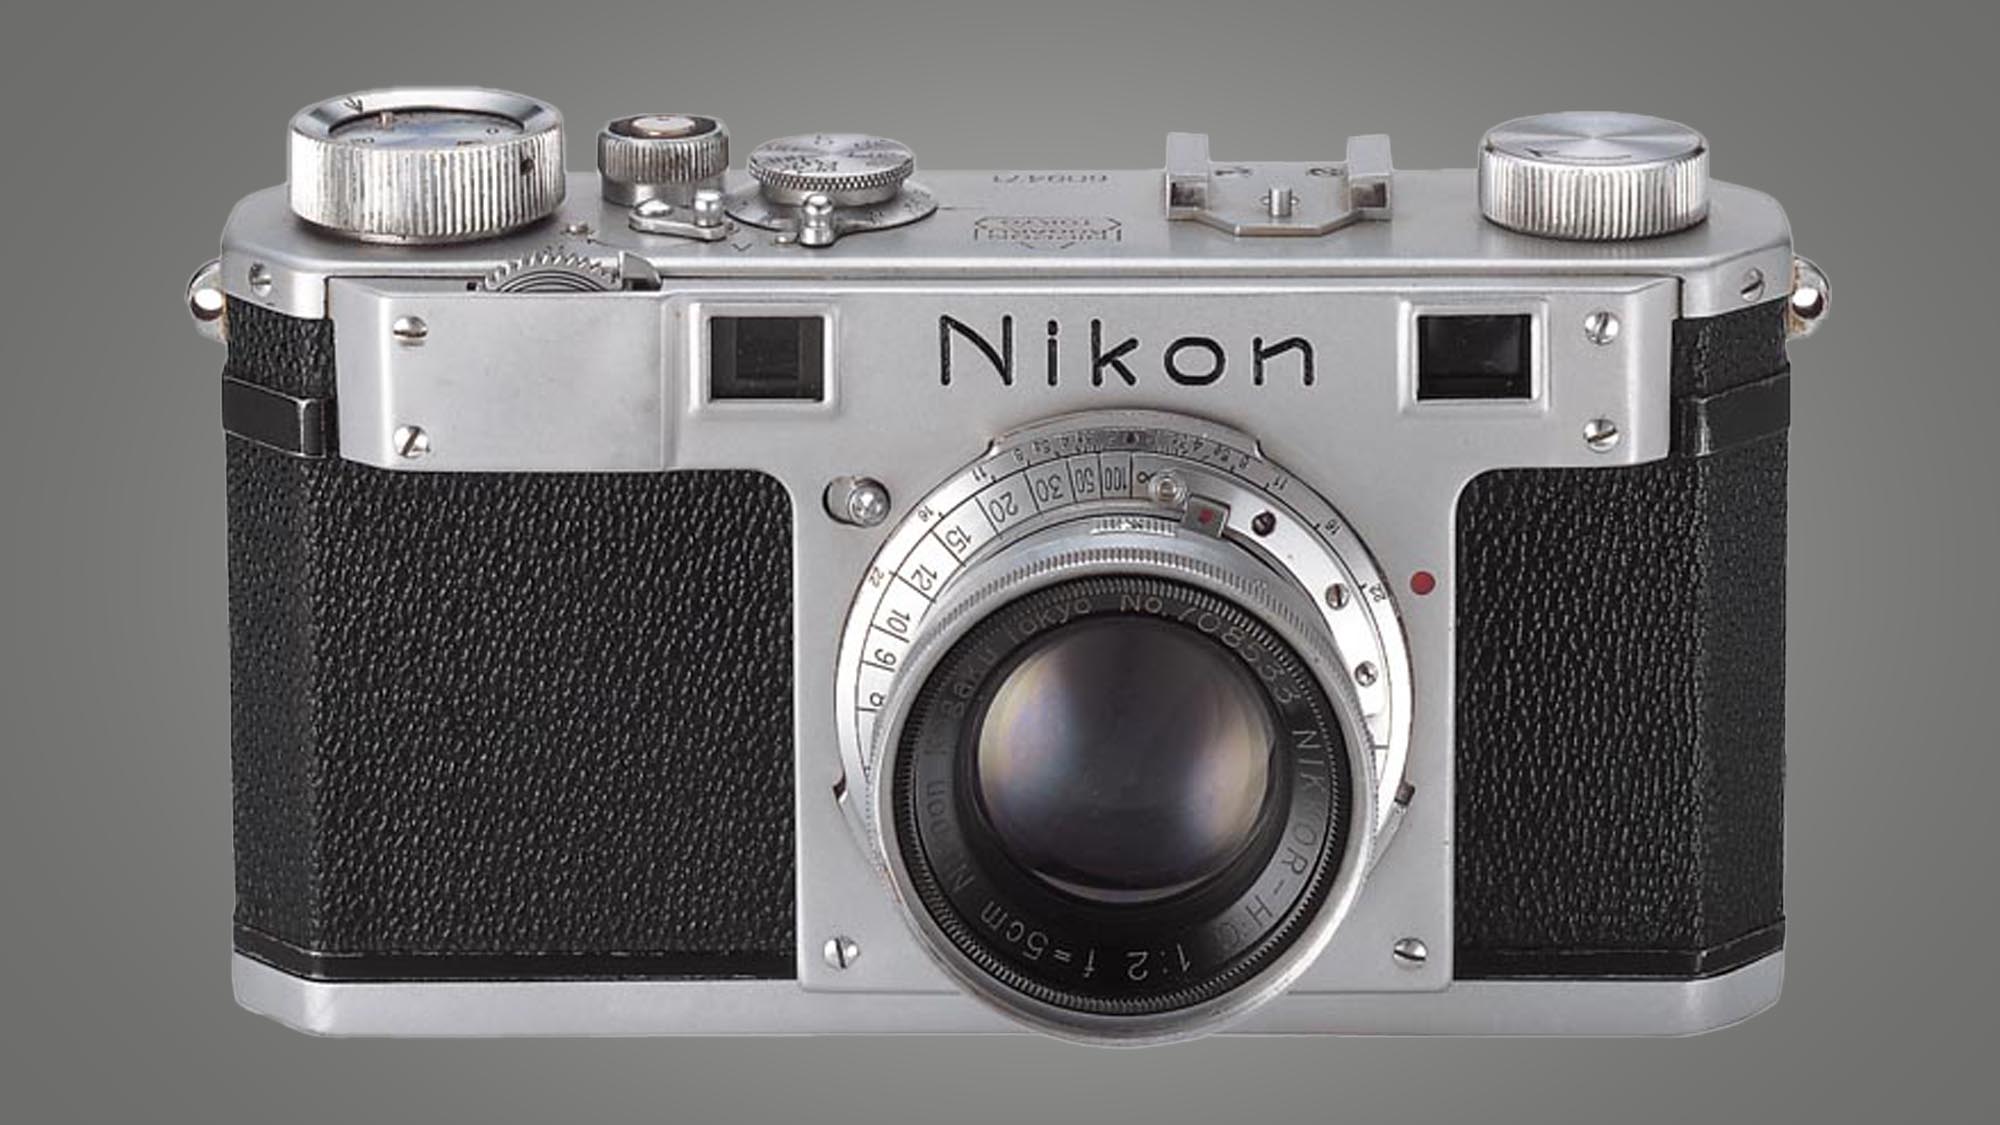 The first ever Nikon camera on a grey background